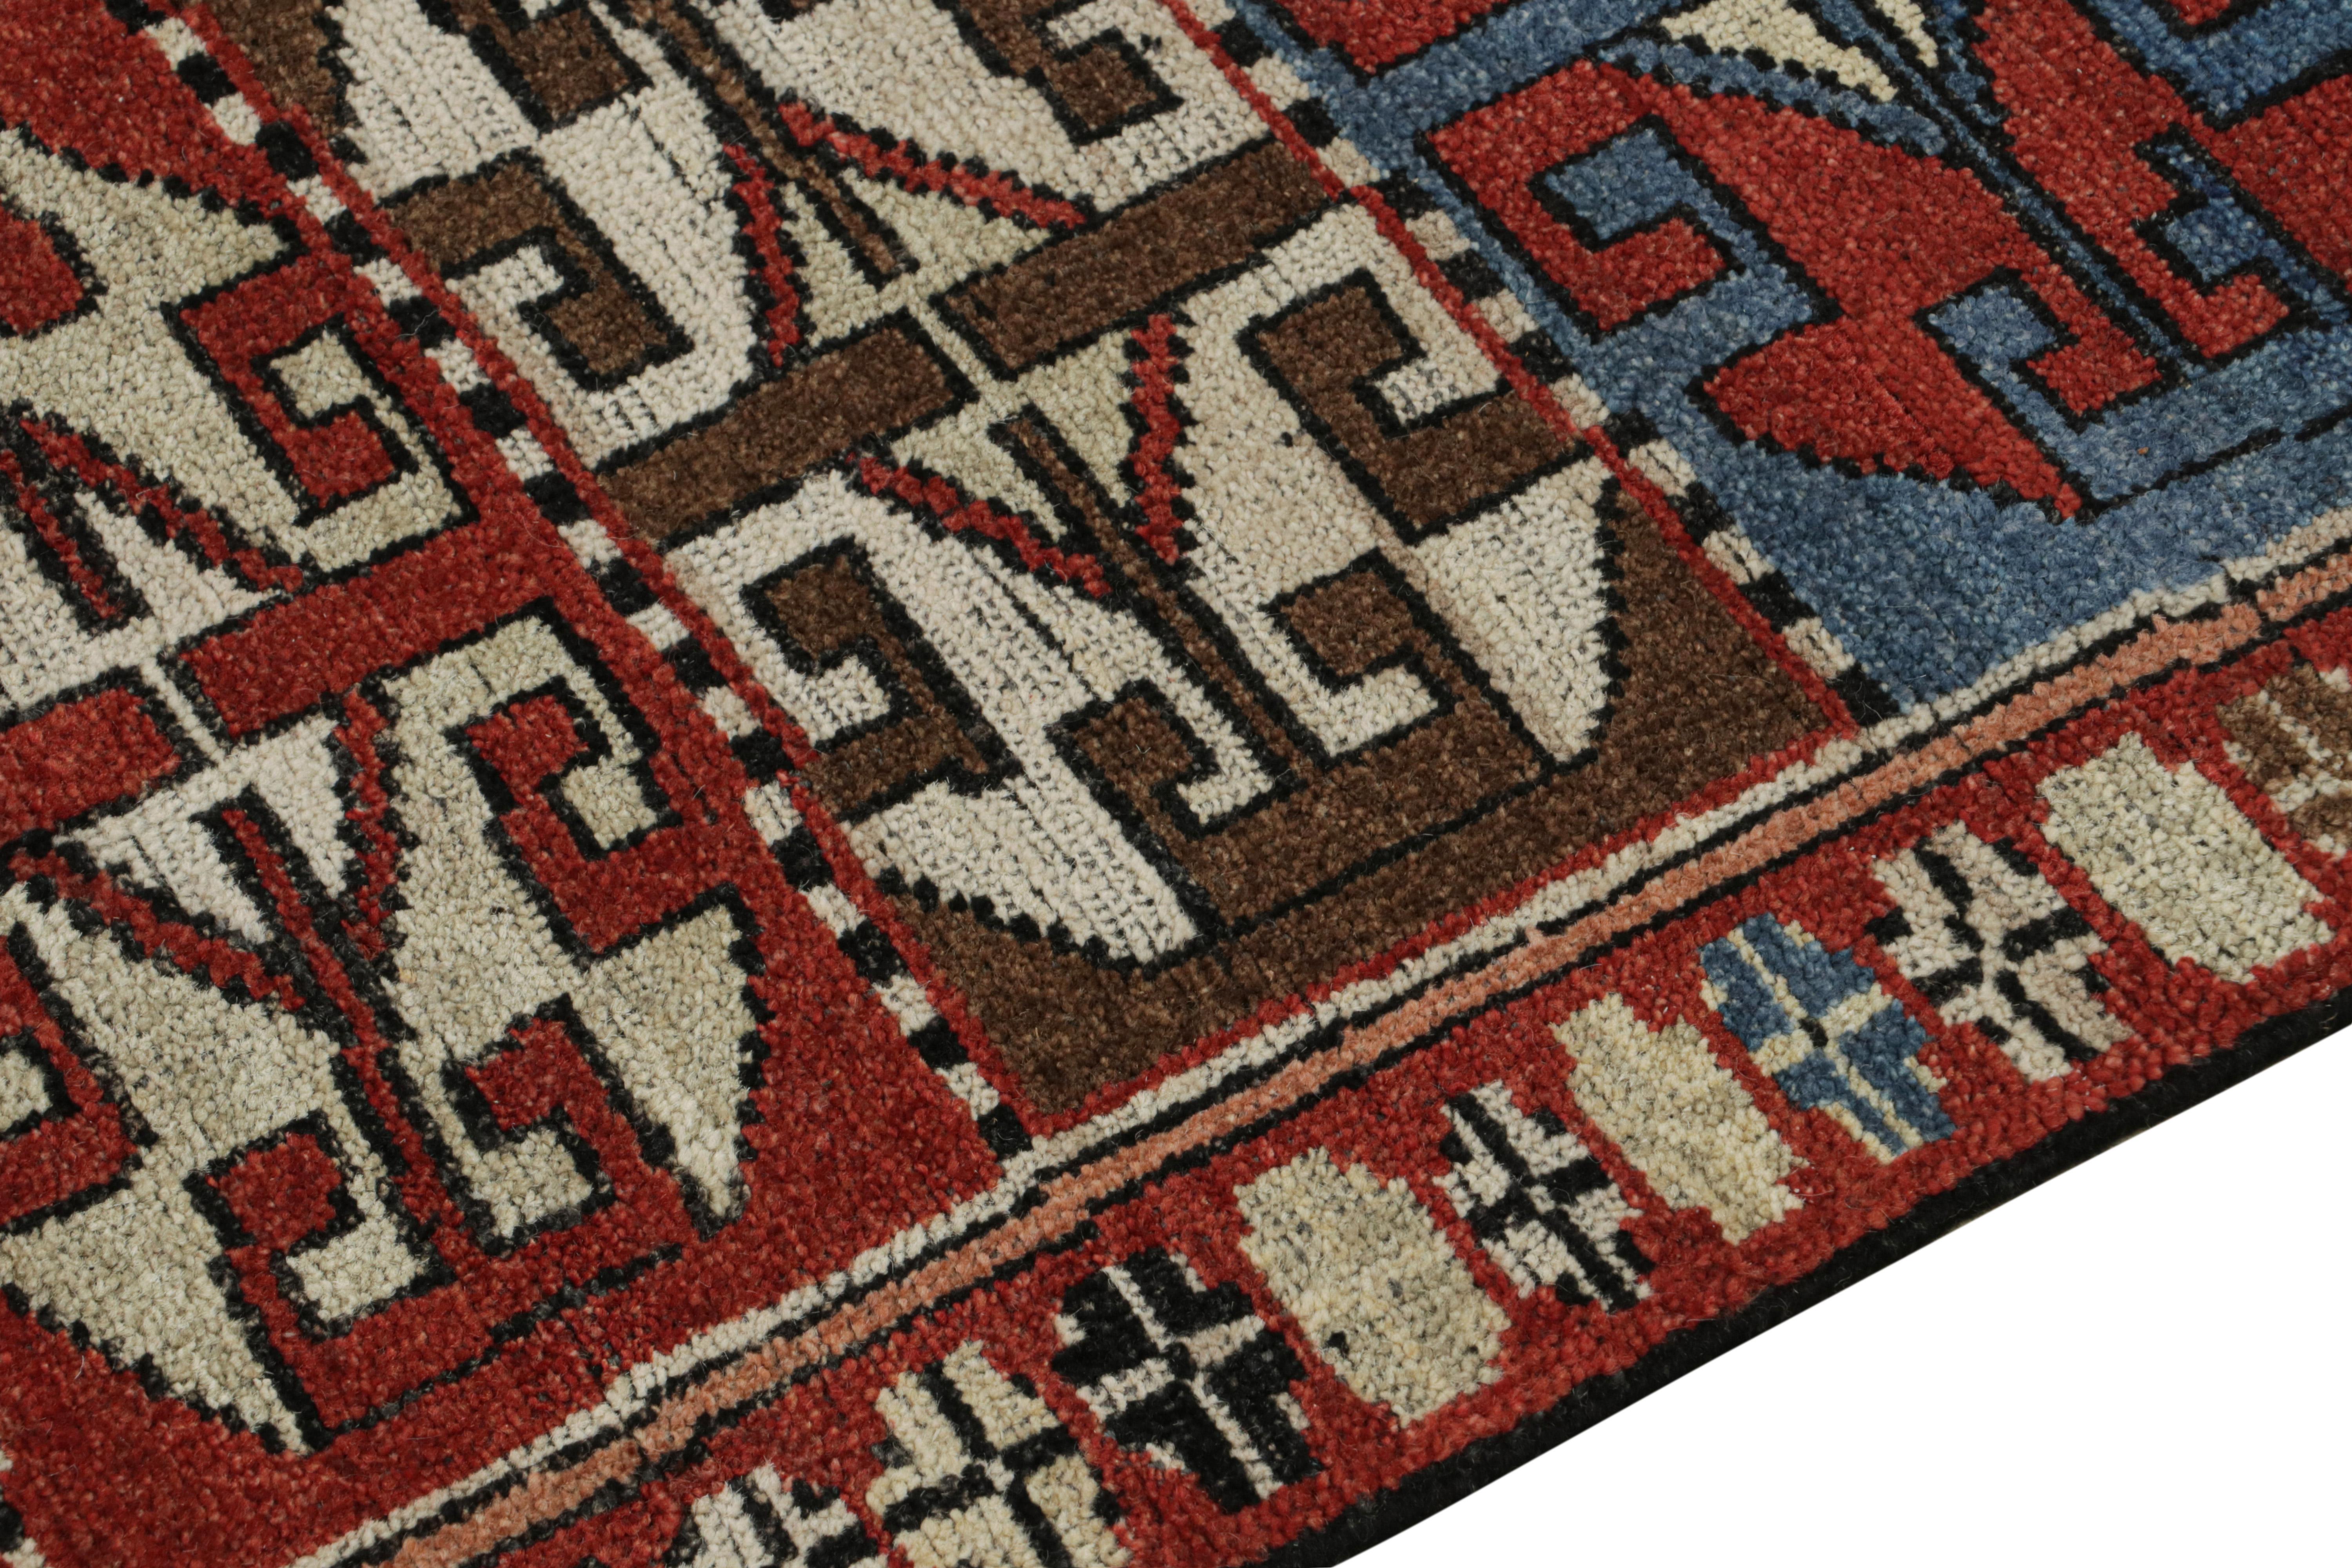 Rug & Kilim’s Antique Tribal Style Rug in Red, Blue & Brown Patterns For Sale 1